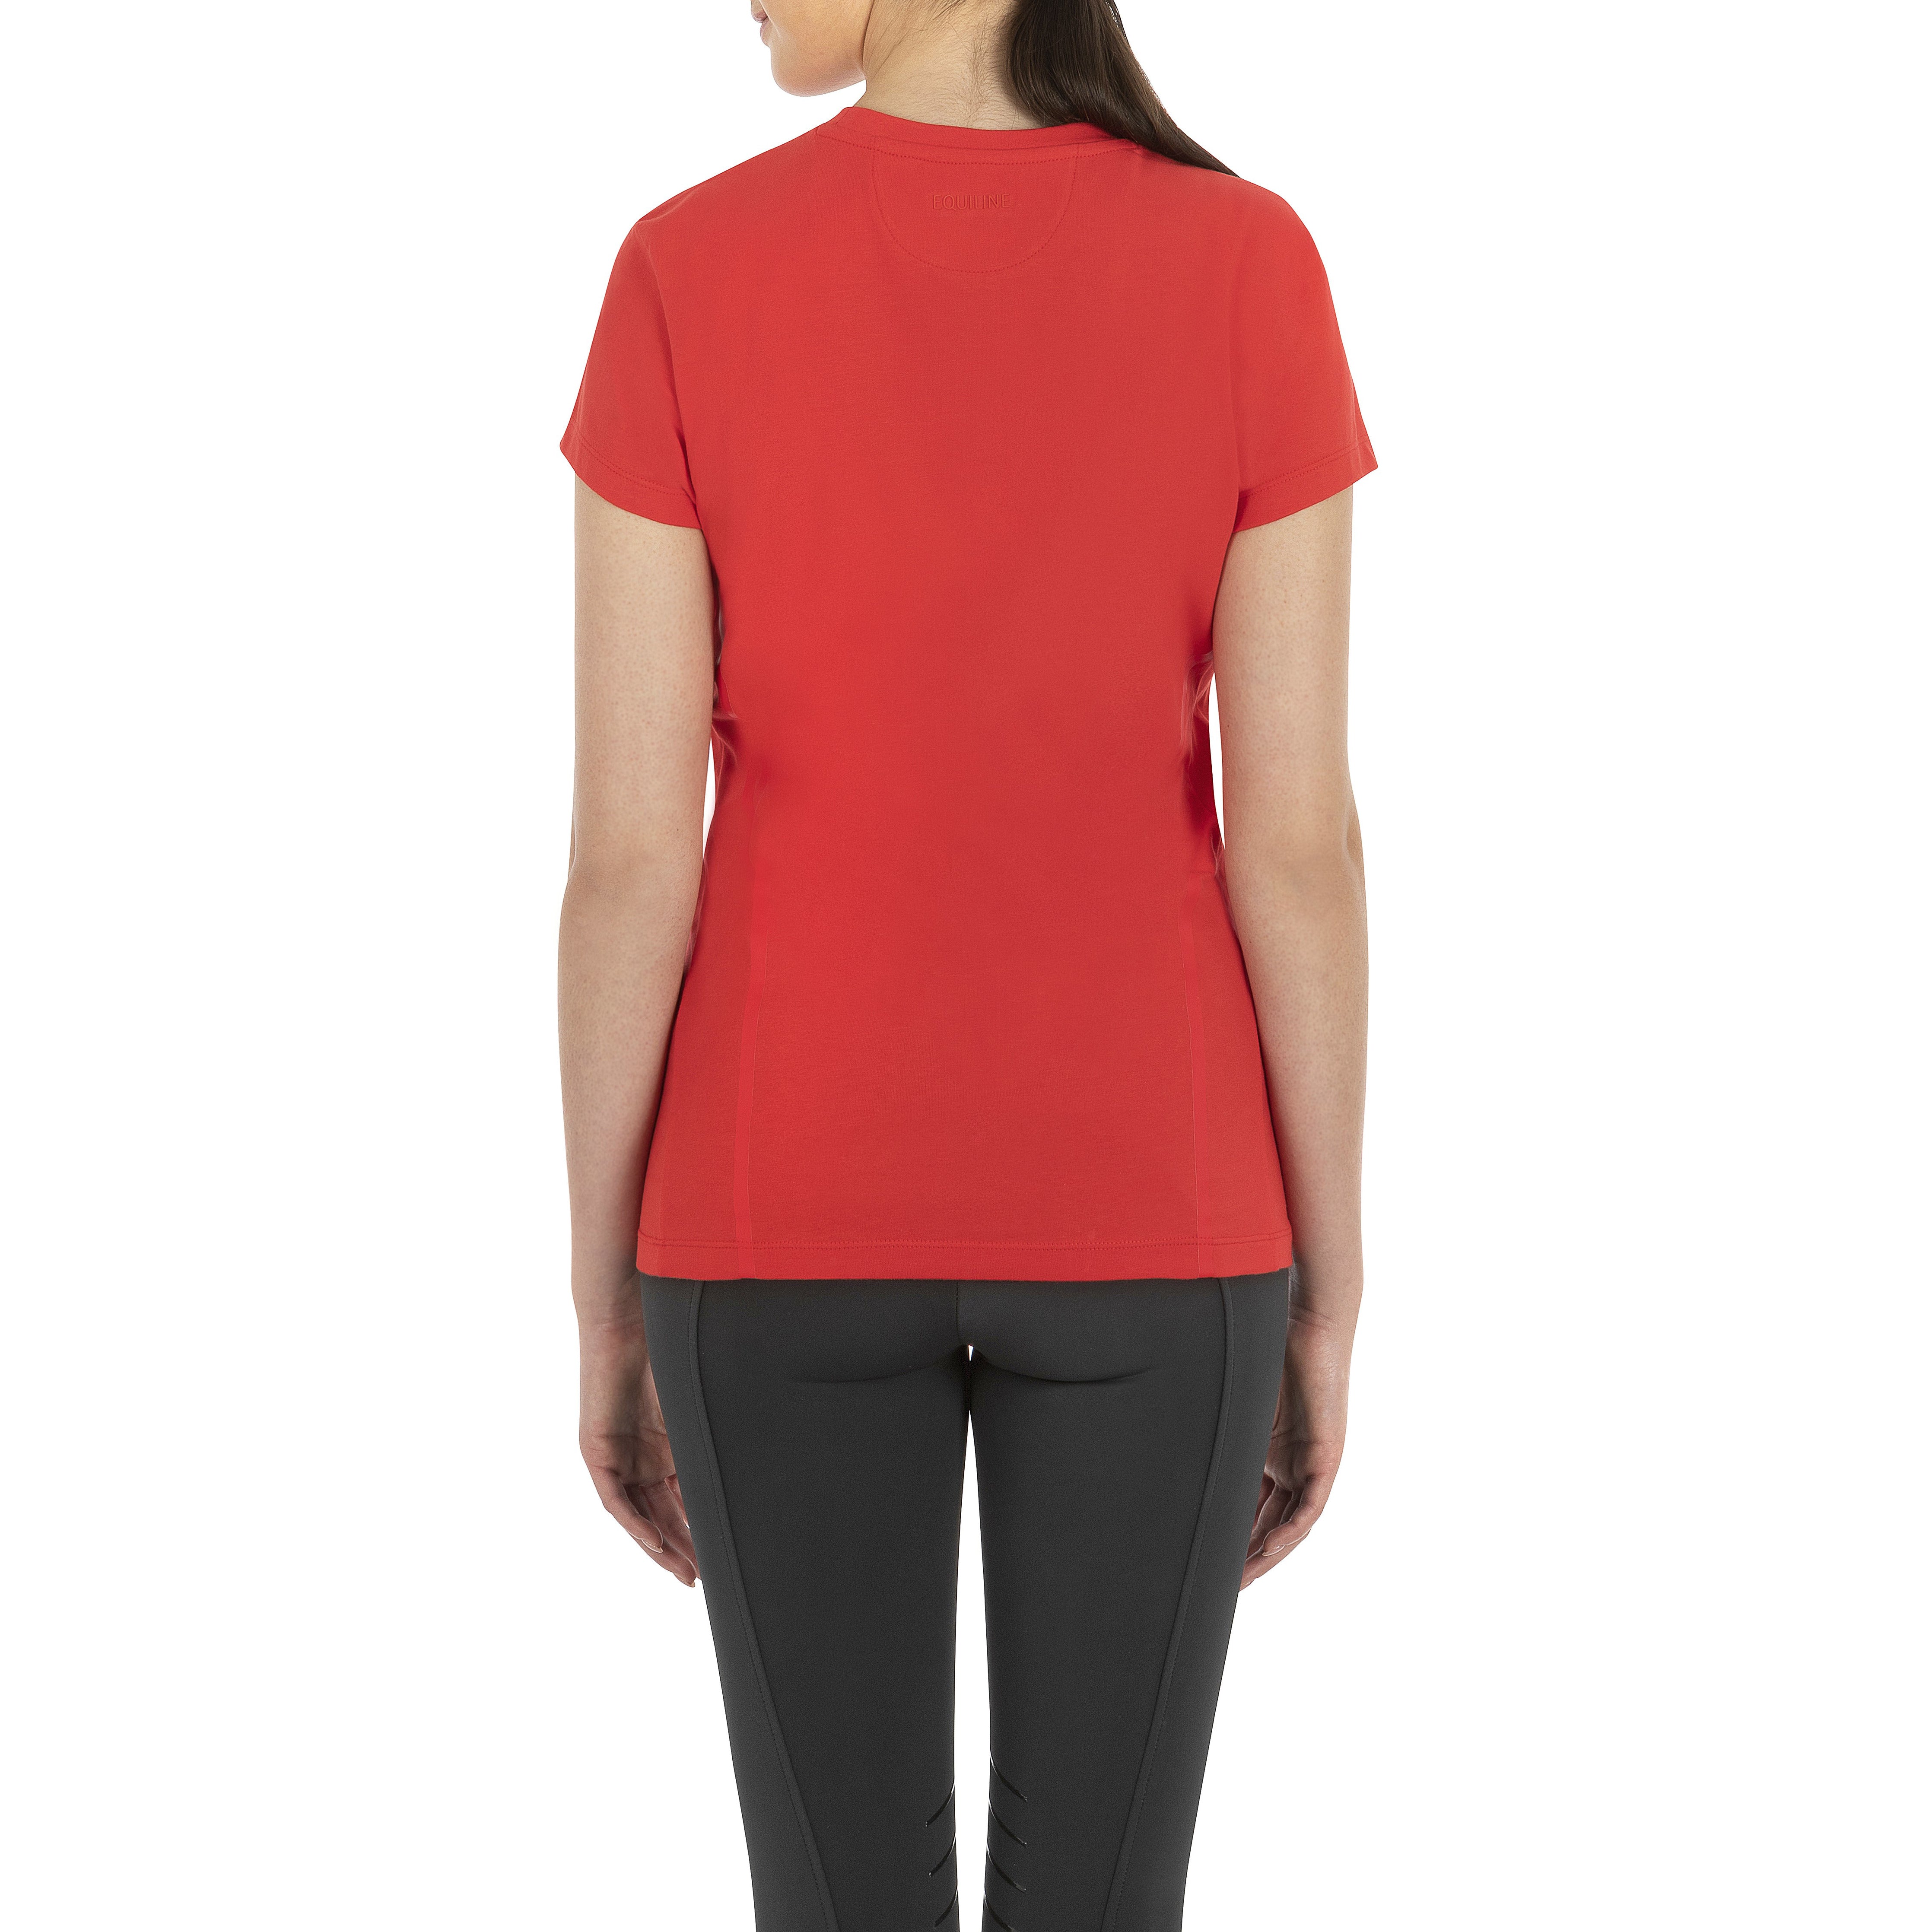 Equiline CecilyC Top